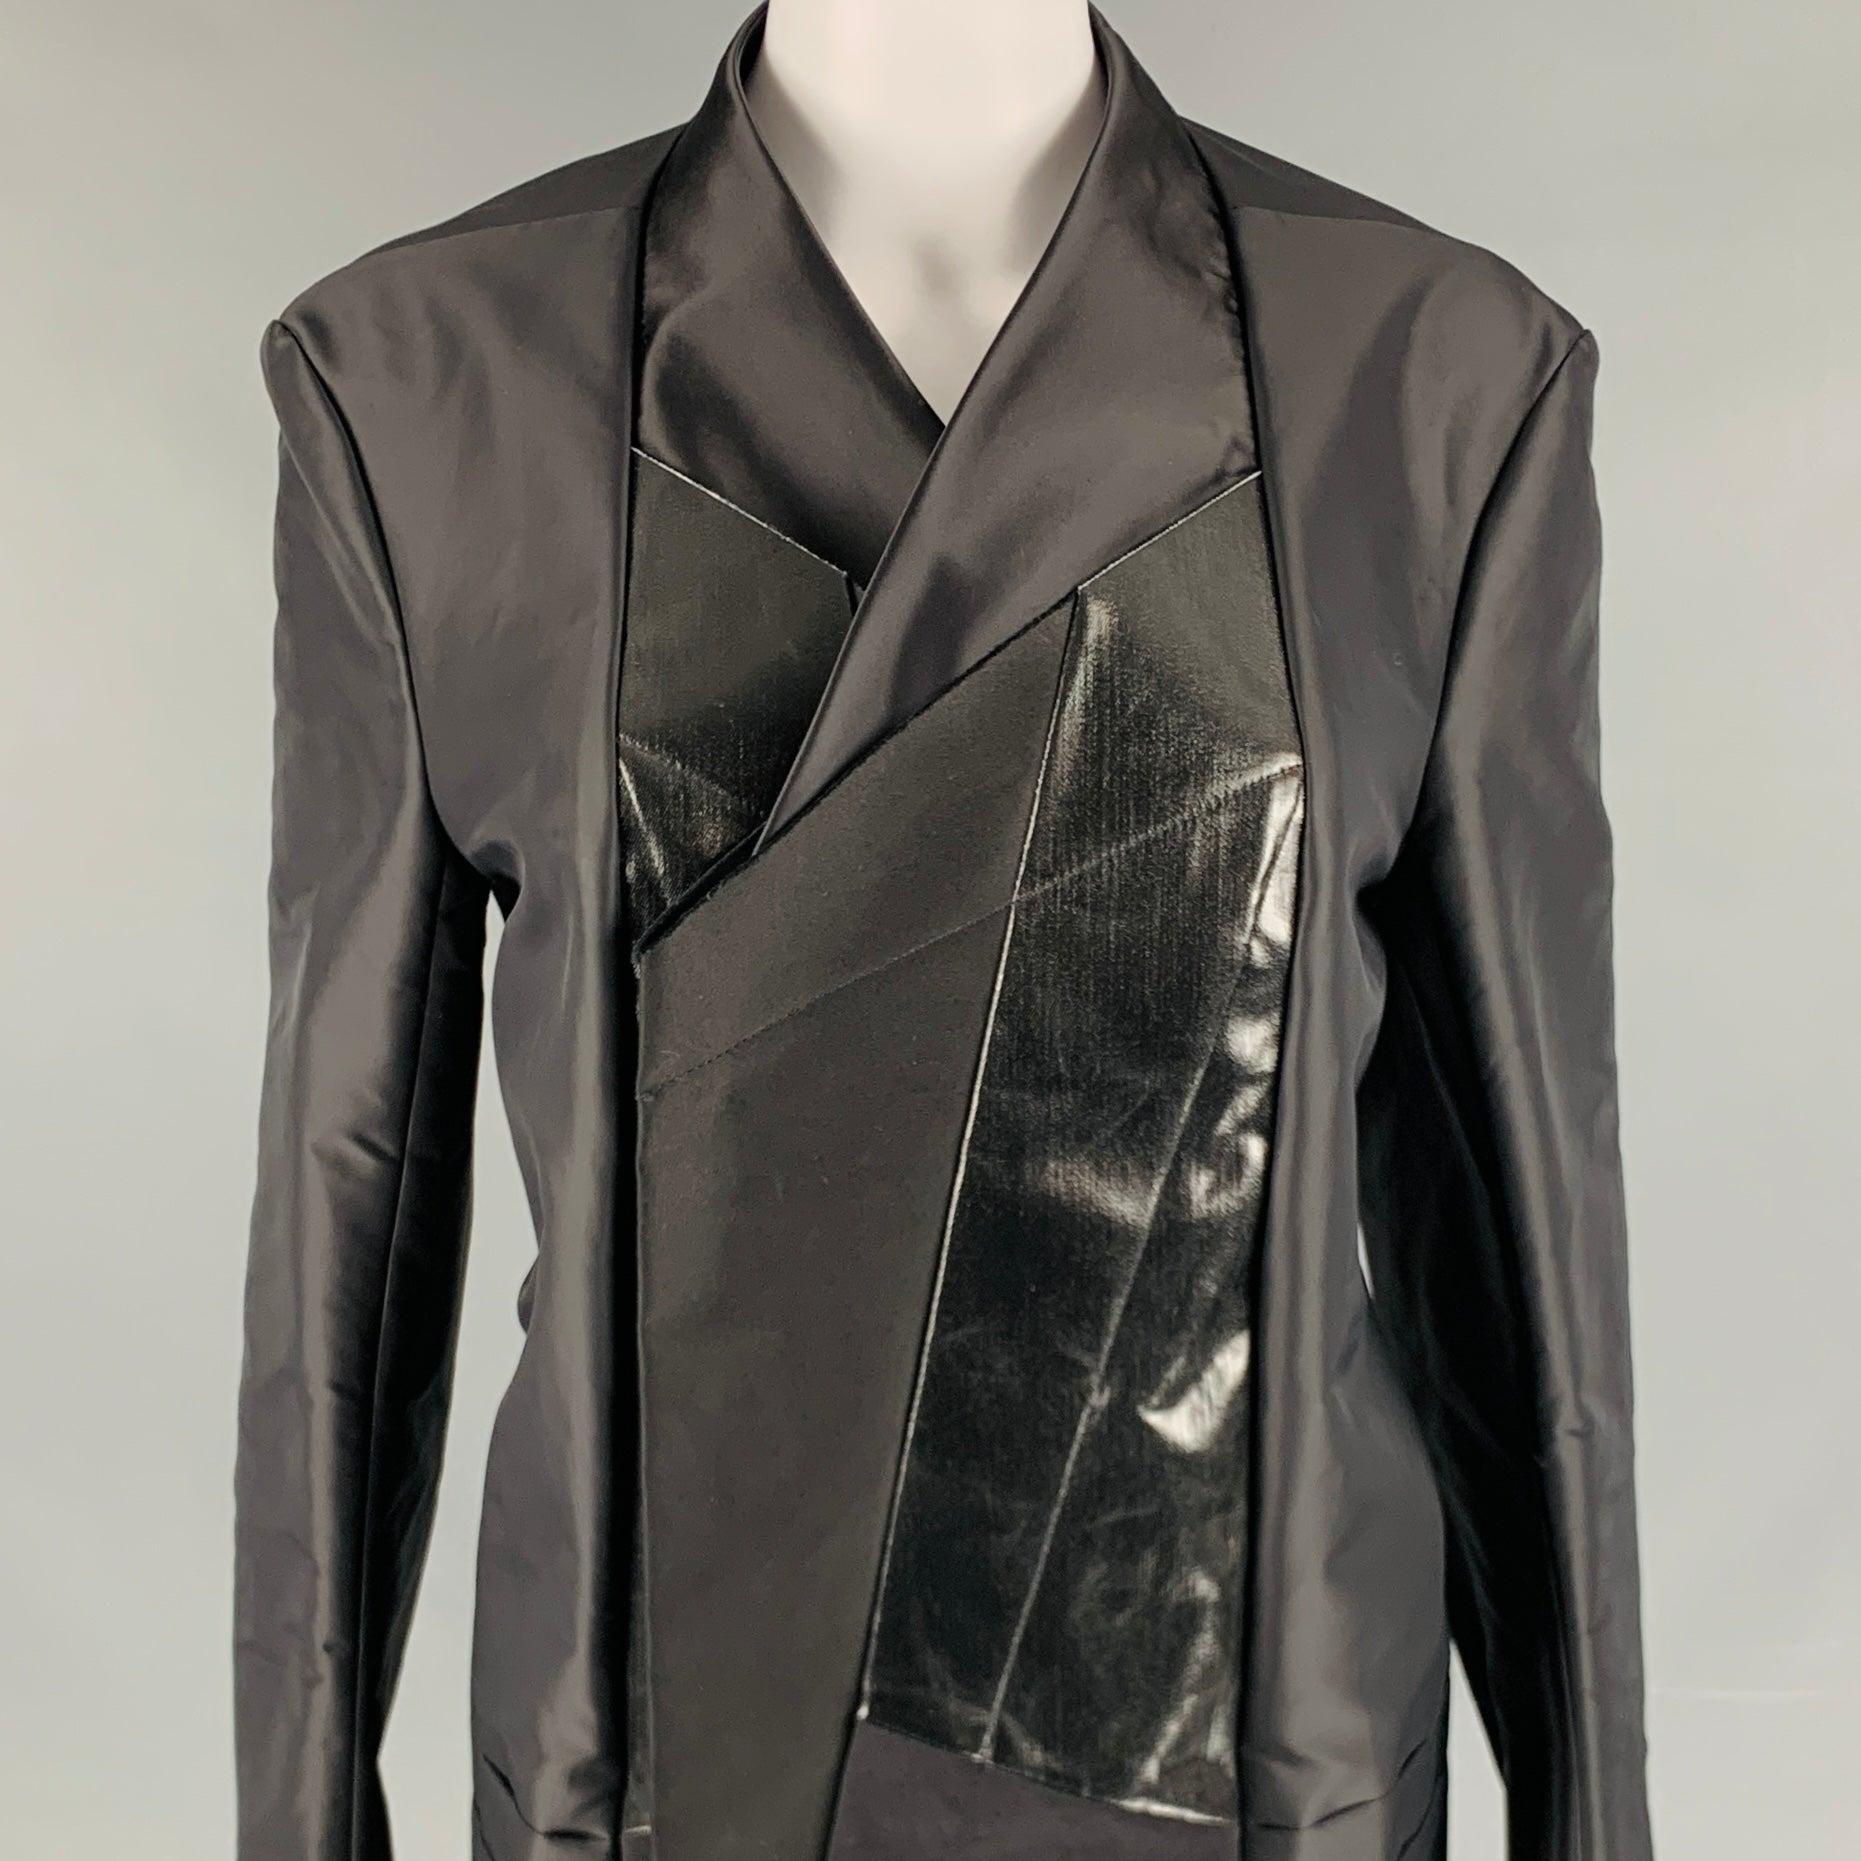 RICK OWENS coat in a black nylon and cotton woven material featuring a collar less style, patch mixed fabric details, and a snap button closure. Made in Italy.New with Tags. 

Marked:   42 

Measurements: 
 
Shoulder: 17.5 inches Bust: 42 inches